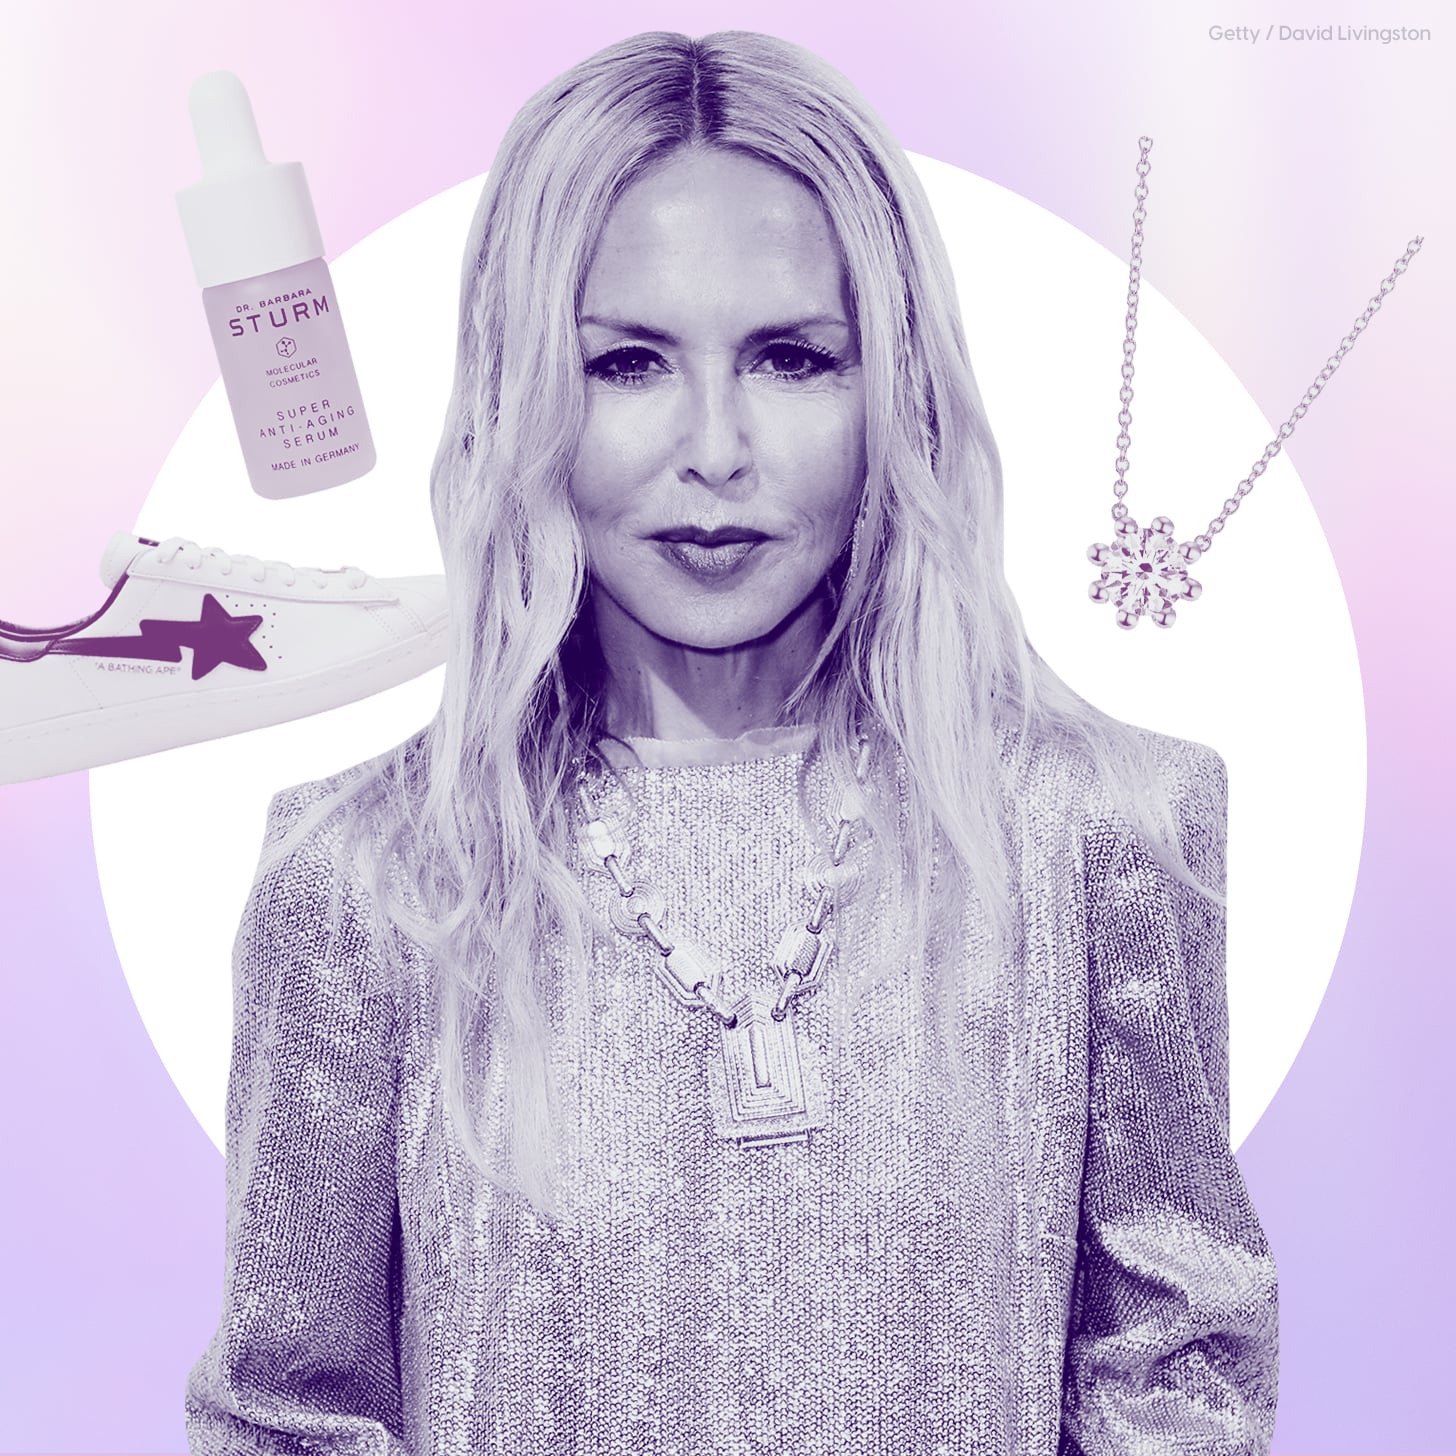 Rachel Zoe: world's most famous celebrity stylist says family not fashion  comes first